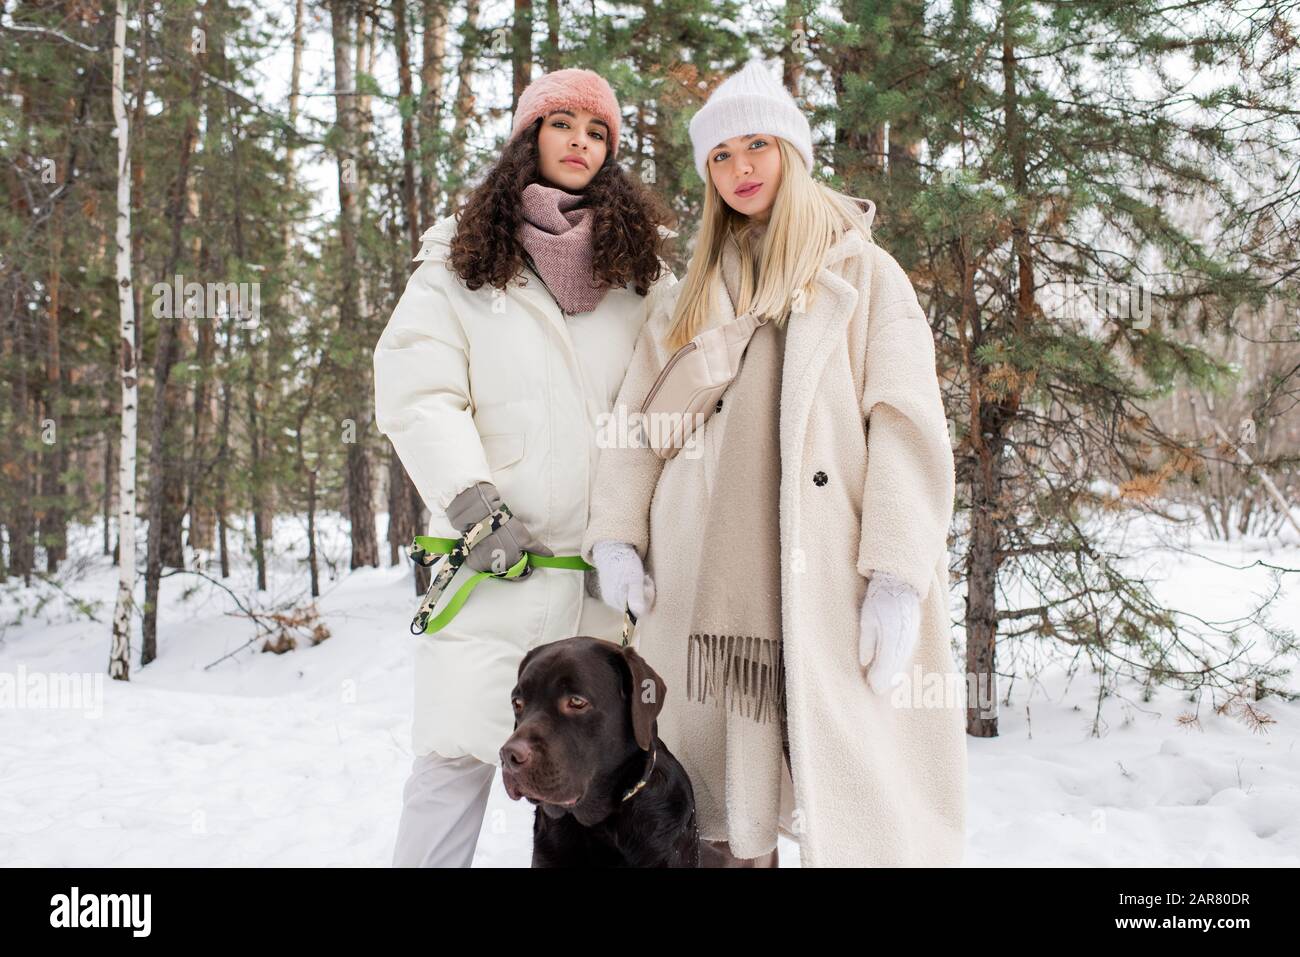 Two young friendly women and black retriever spending winter day in park Stock Photo